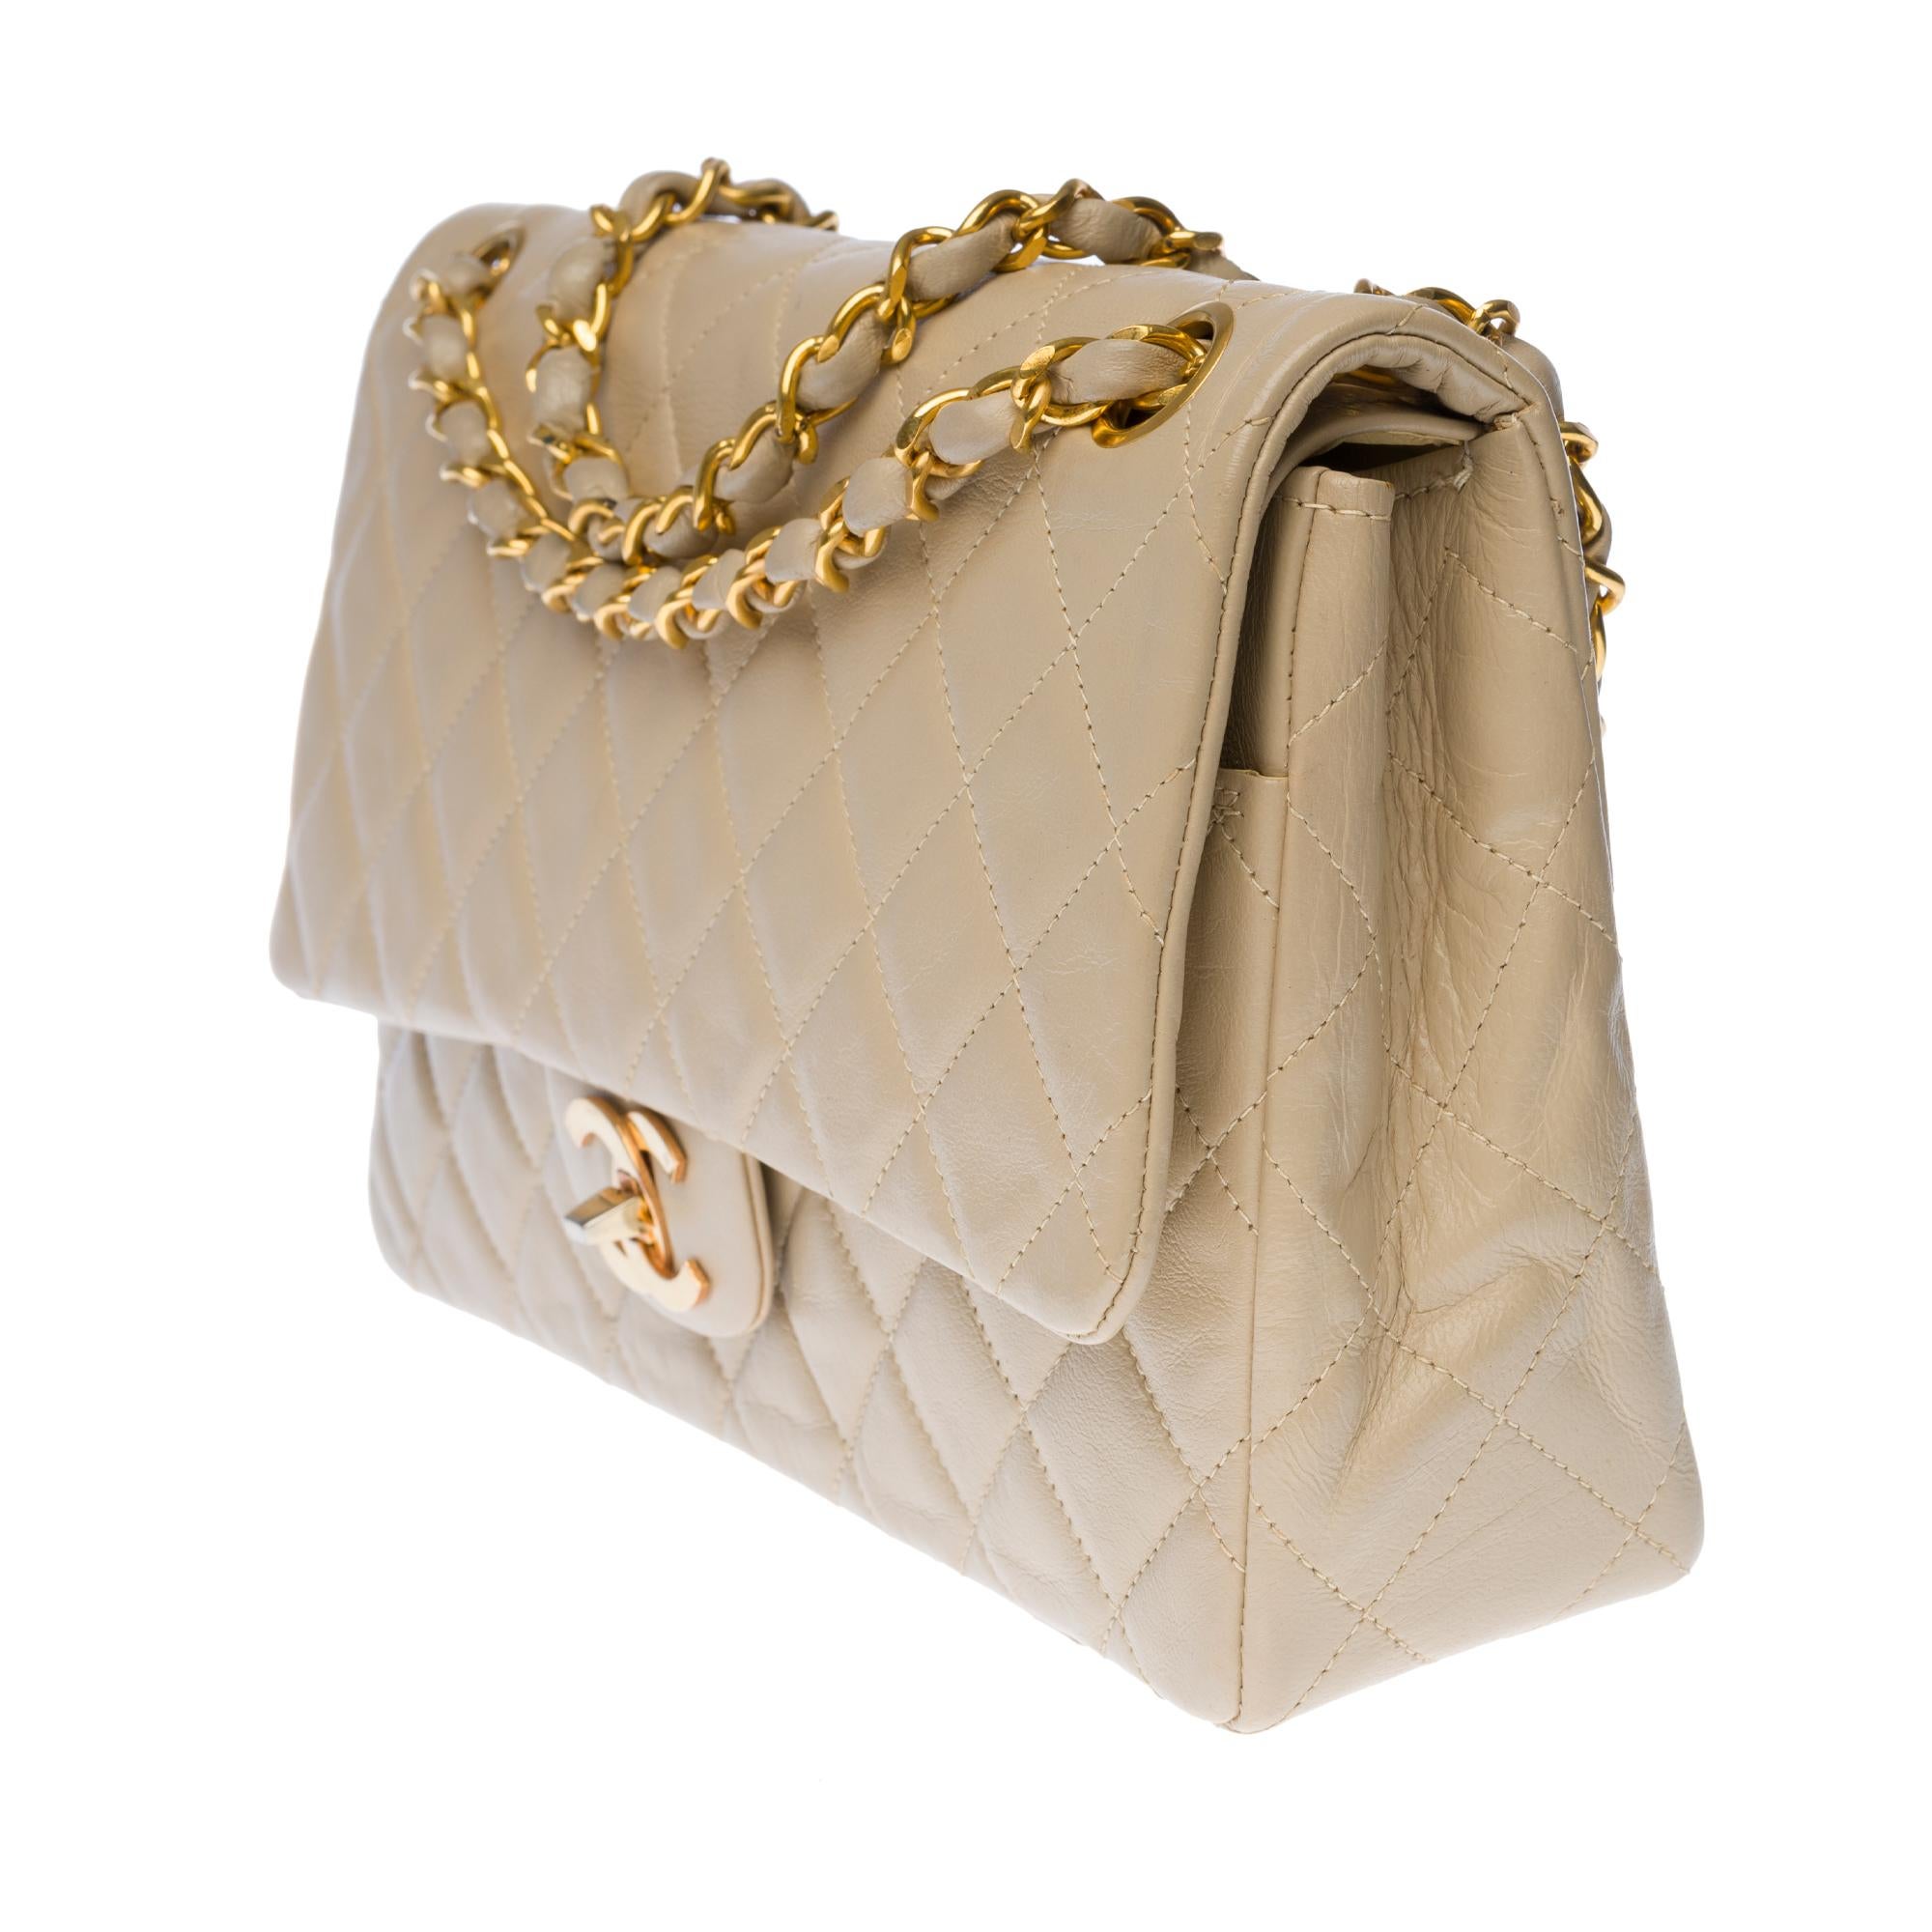 Beige Chanel Timeless Medium double flap Shoulder bag in beige quilted leather, GHW